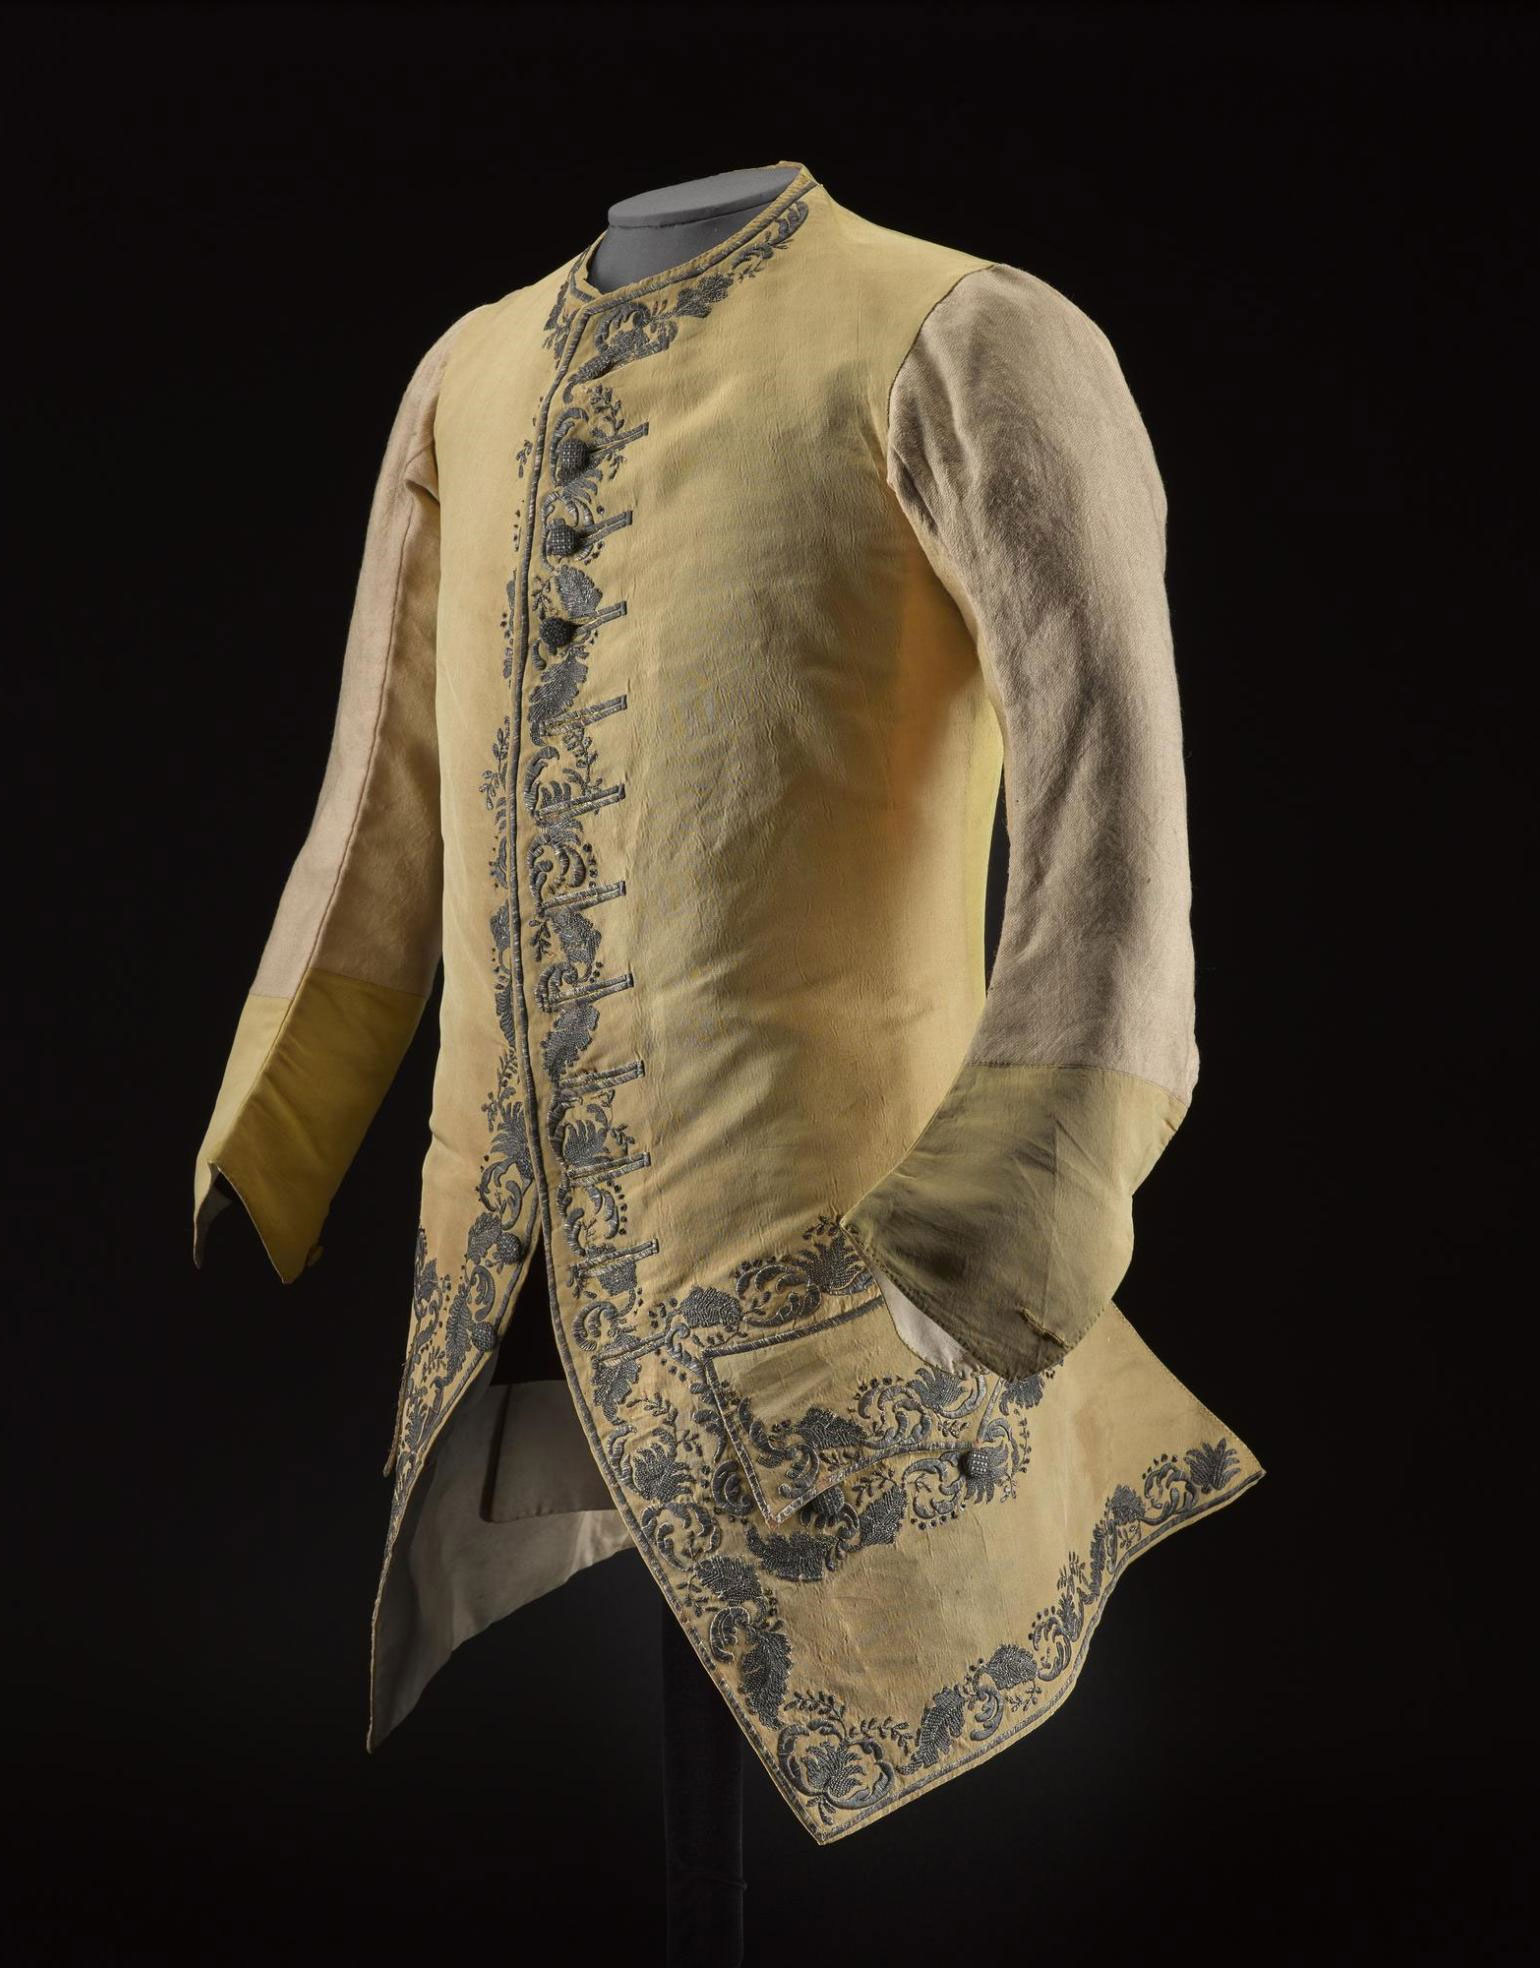 Man's sleeved waistcoat of yellow silk rep, embroidered with a floral design in silver thread, said to have belonged to Prince Charles Edward Stuart.